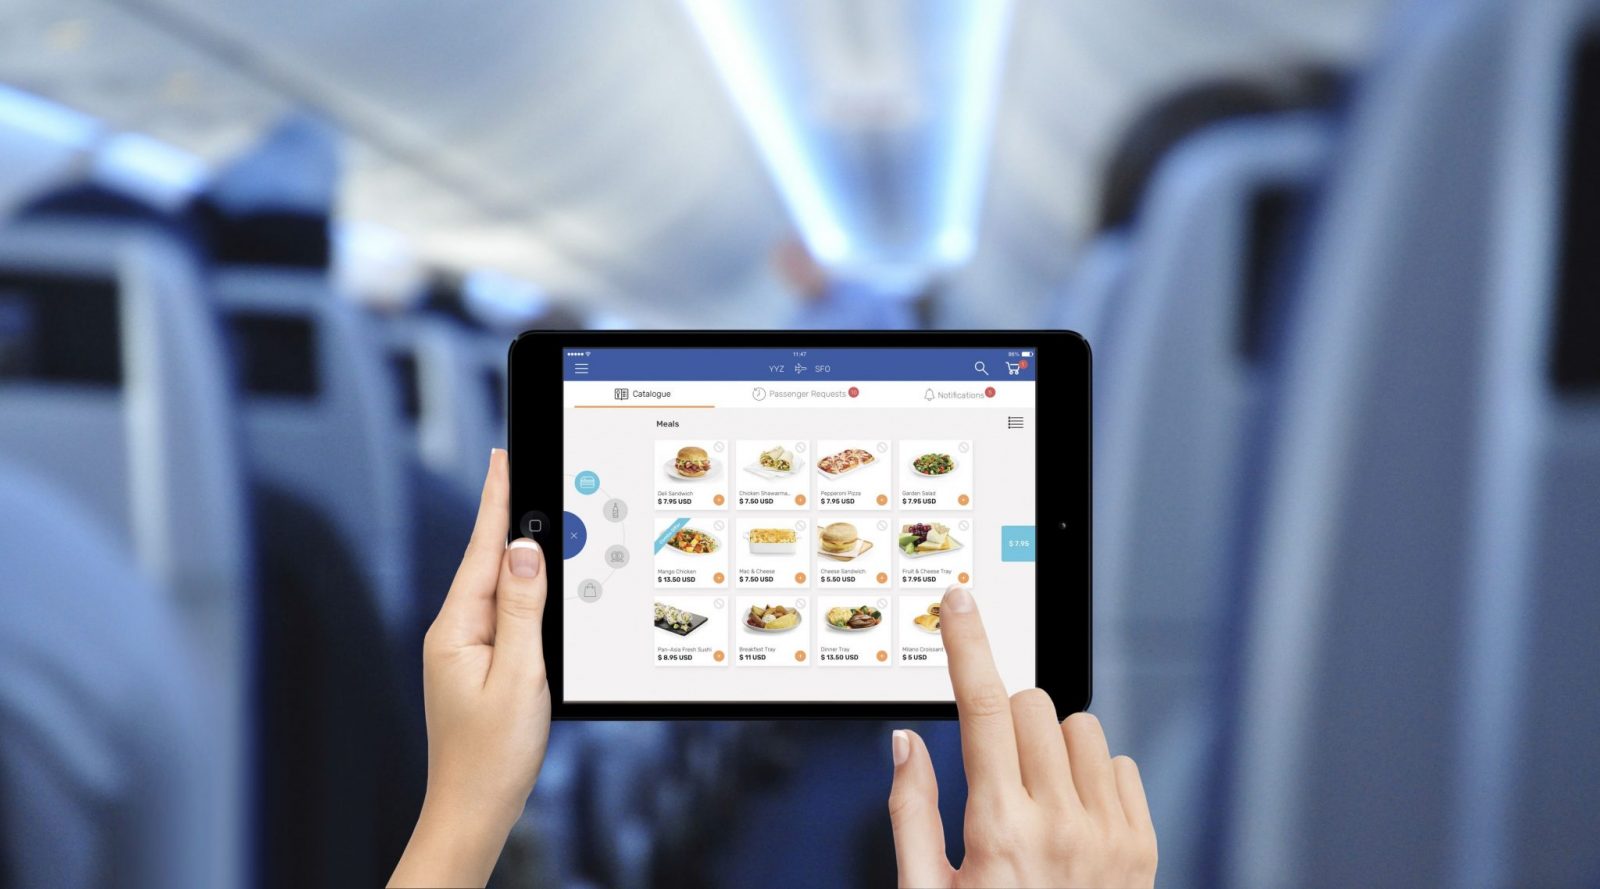 Guestlogix Wants to Revolutionise the Airline Passenger Experience with New Ways to Increase Ancillary Revenue